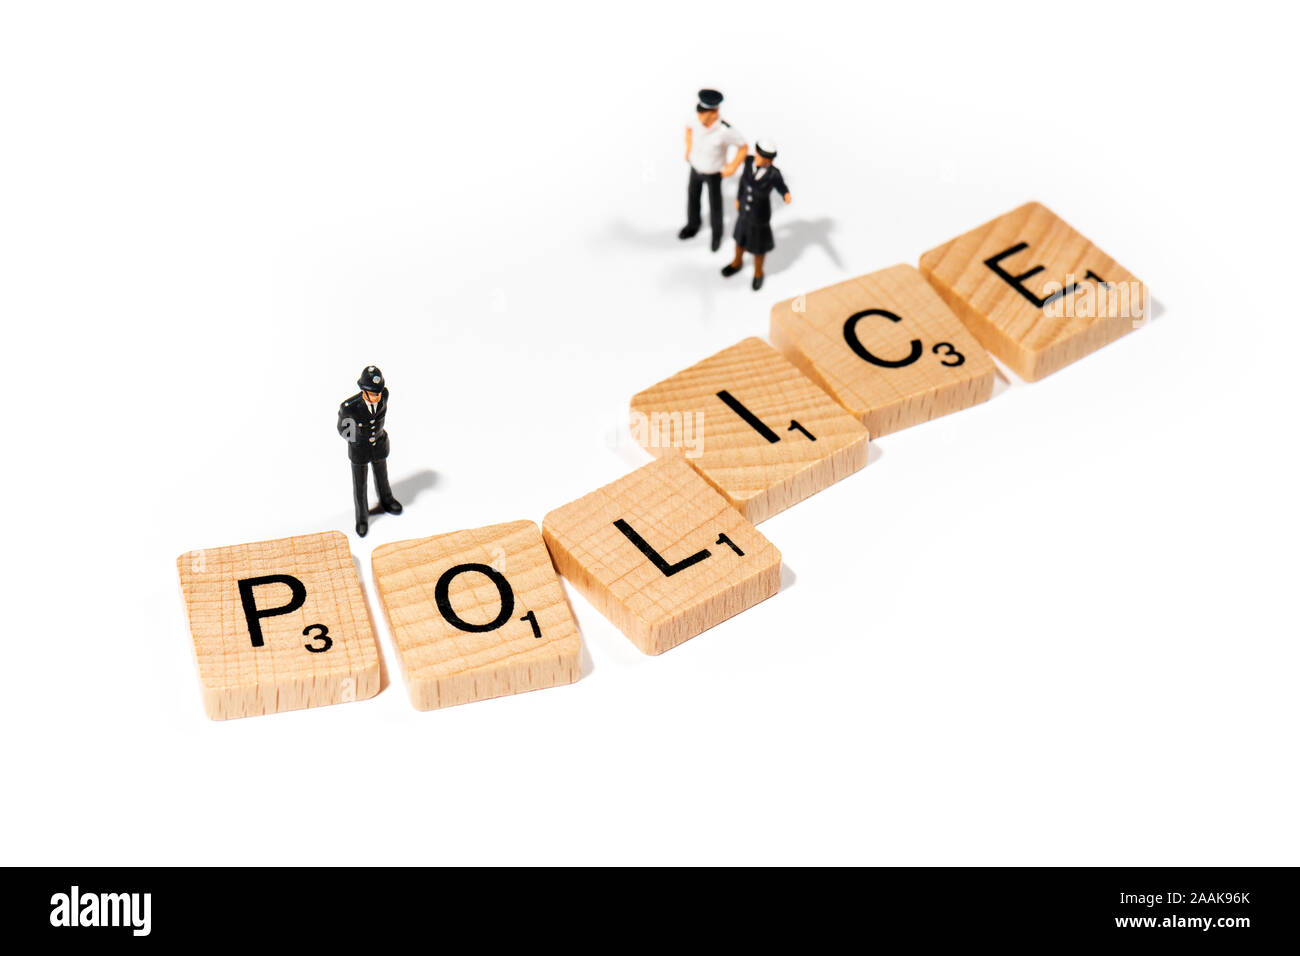 Conceptual: Scrabble letters spell out POLICE , accompanied by  model police officer figurines. Stock Photo